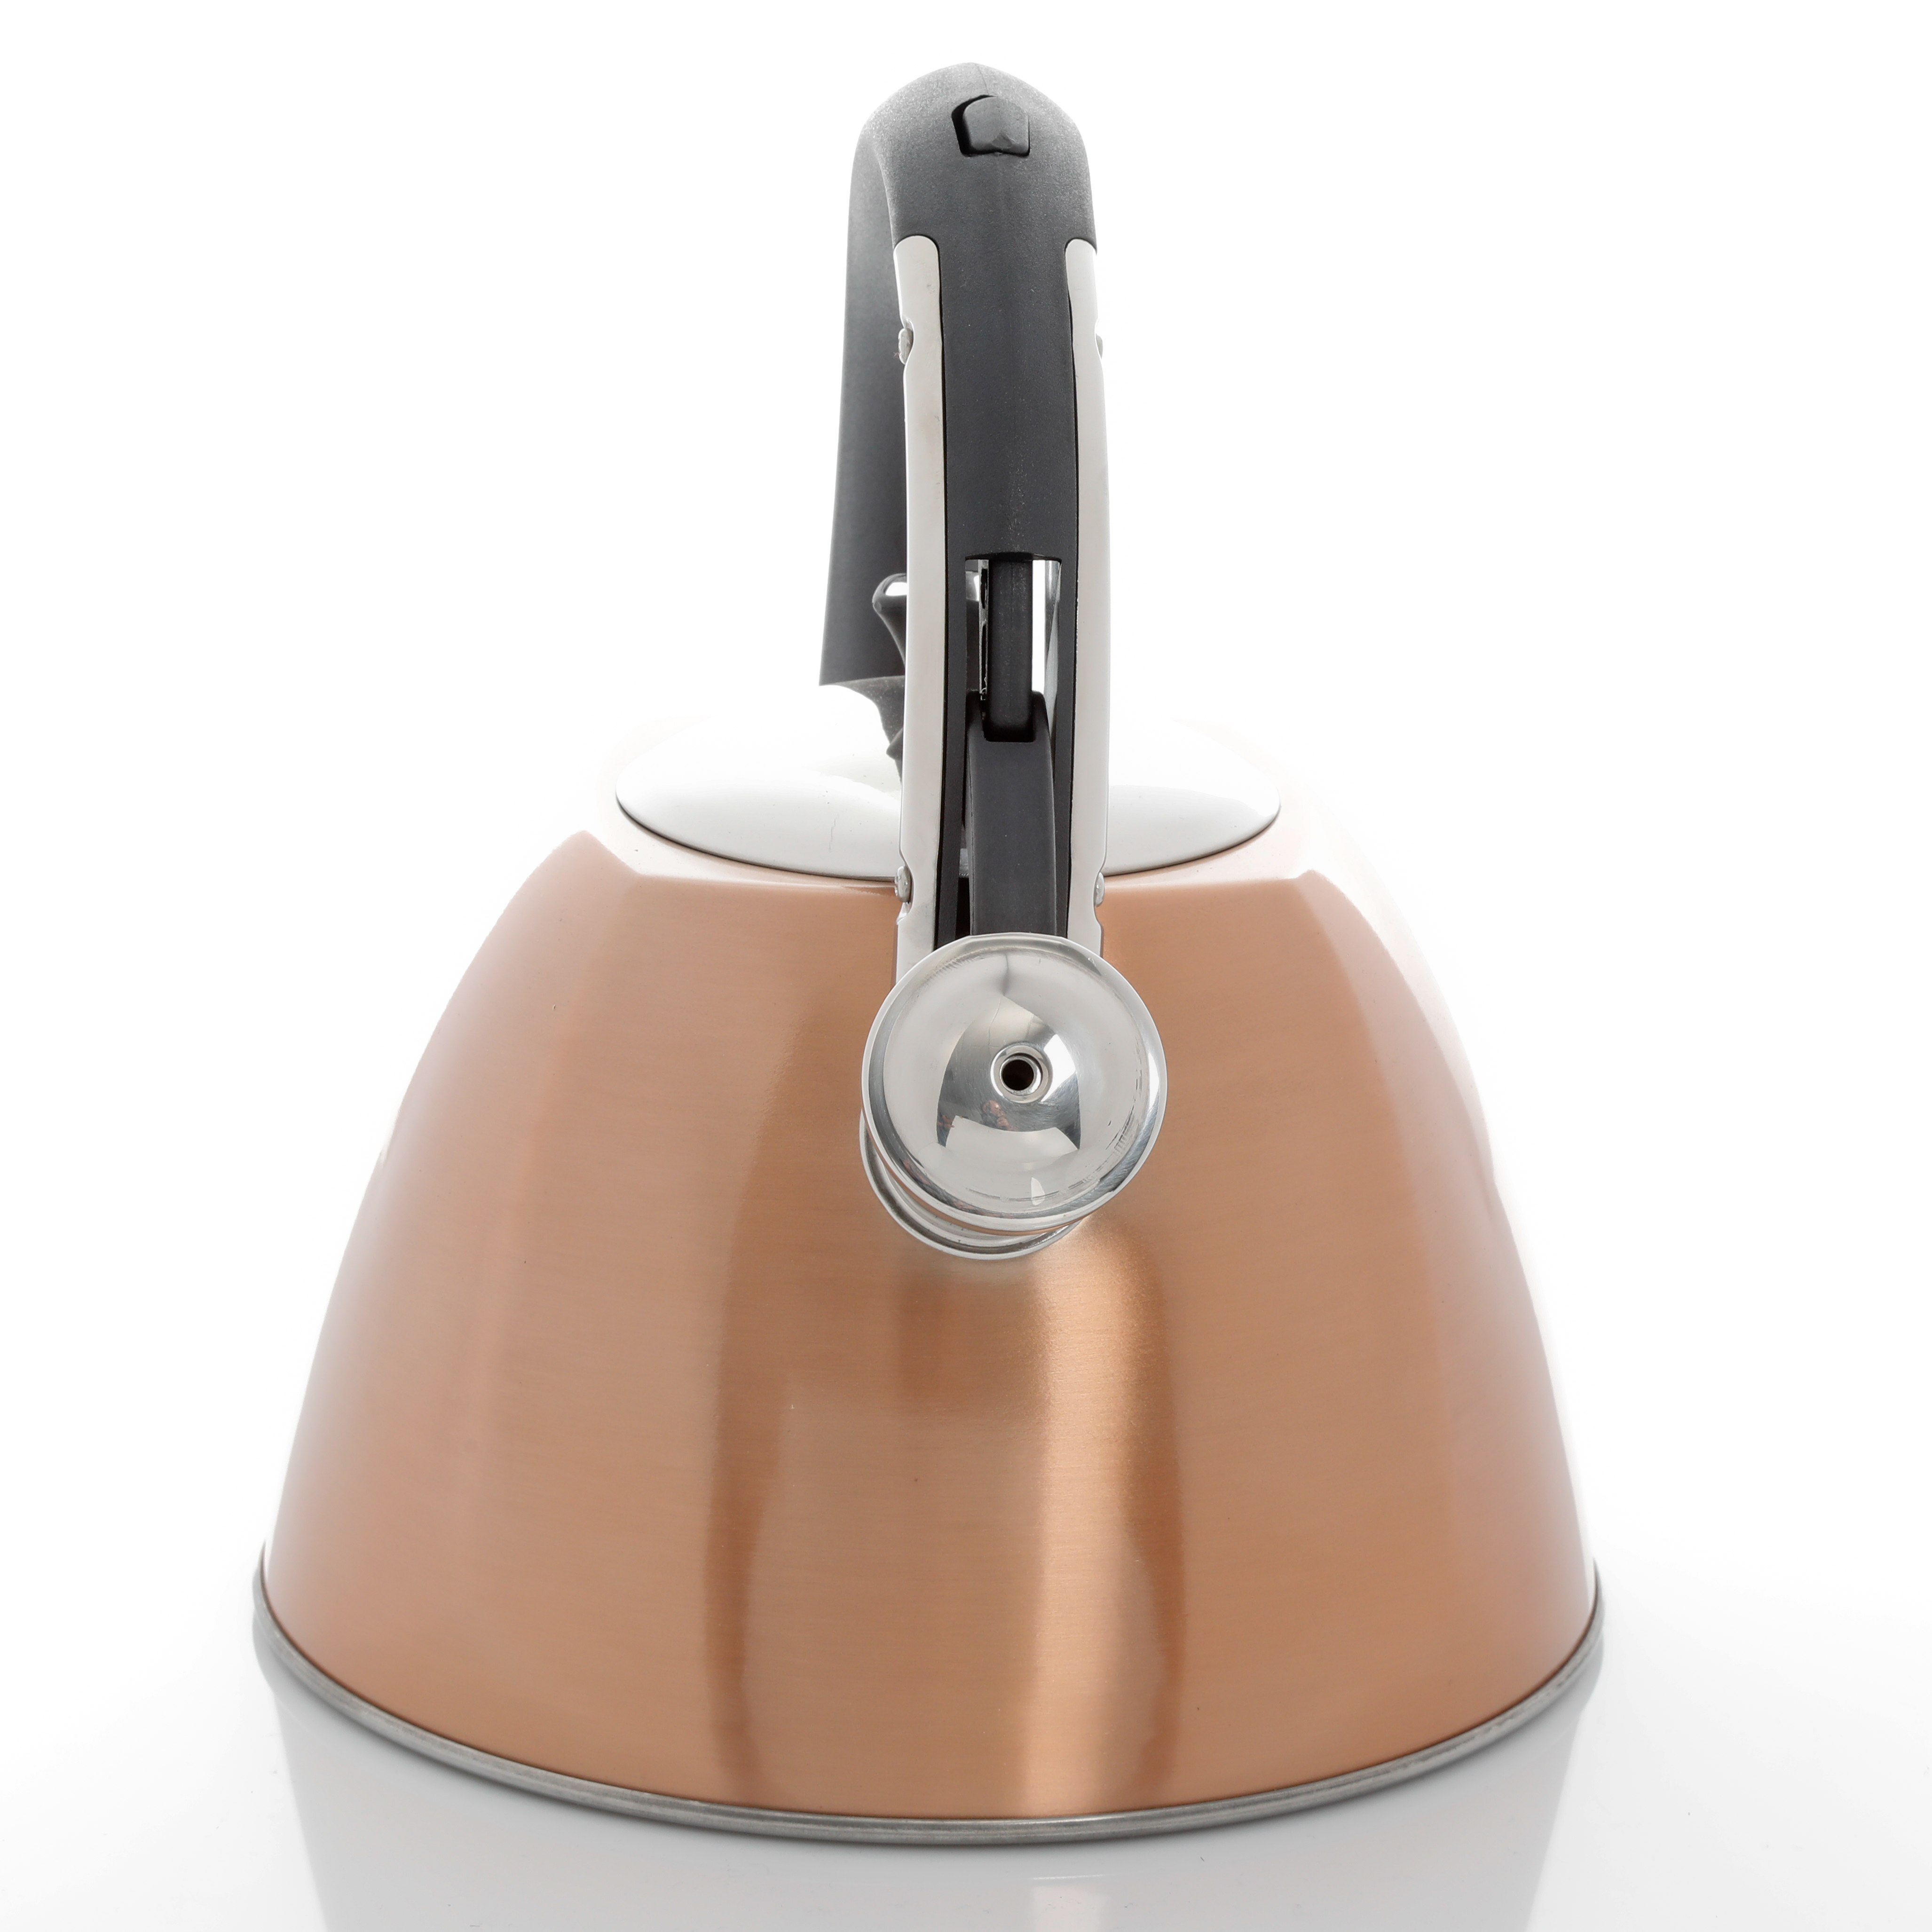 Mr. Coffee Belgrove 2.5 Quart Stainless Steel Tea Kettle in Copper - image 4 of 7